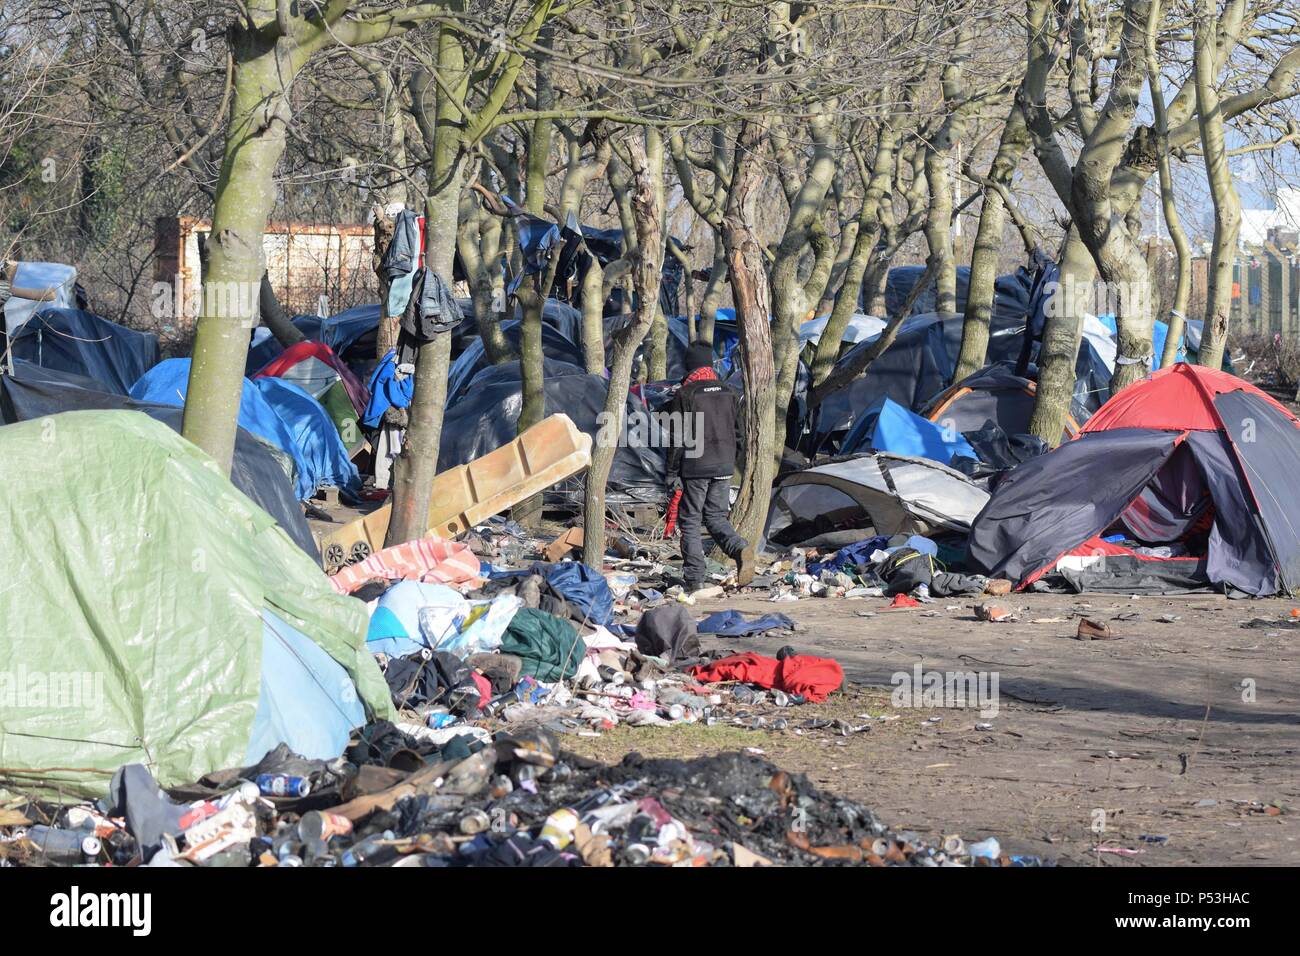 February 19, 2015 - Calais, France: Hundreds of illegal migrants live in tents in an industrial zone of Calais as they wait for an opportunity to get to Britain. The migrants, who come mostly from Erythrea, Ethiopia, Afghanistan, Syria, and Sudan try their luck every night by discreetly boarding trucks about to enter the ferry boat or the Eurotunnel to England. Tentes de migrants dans la 'jungle' tioxide de Calais. Stock Photo